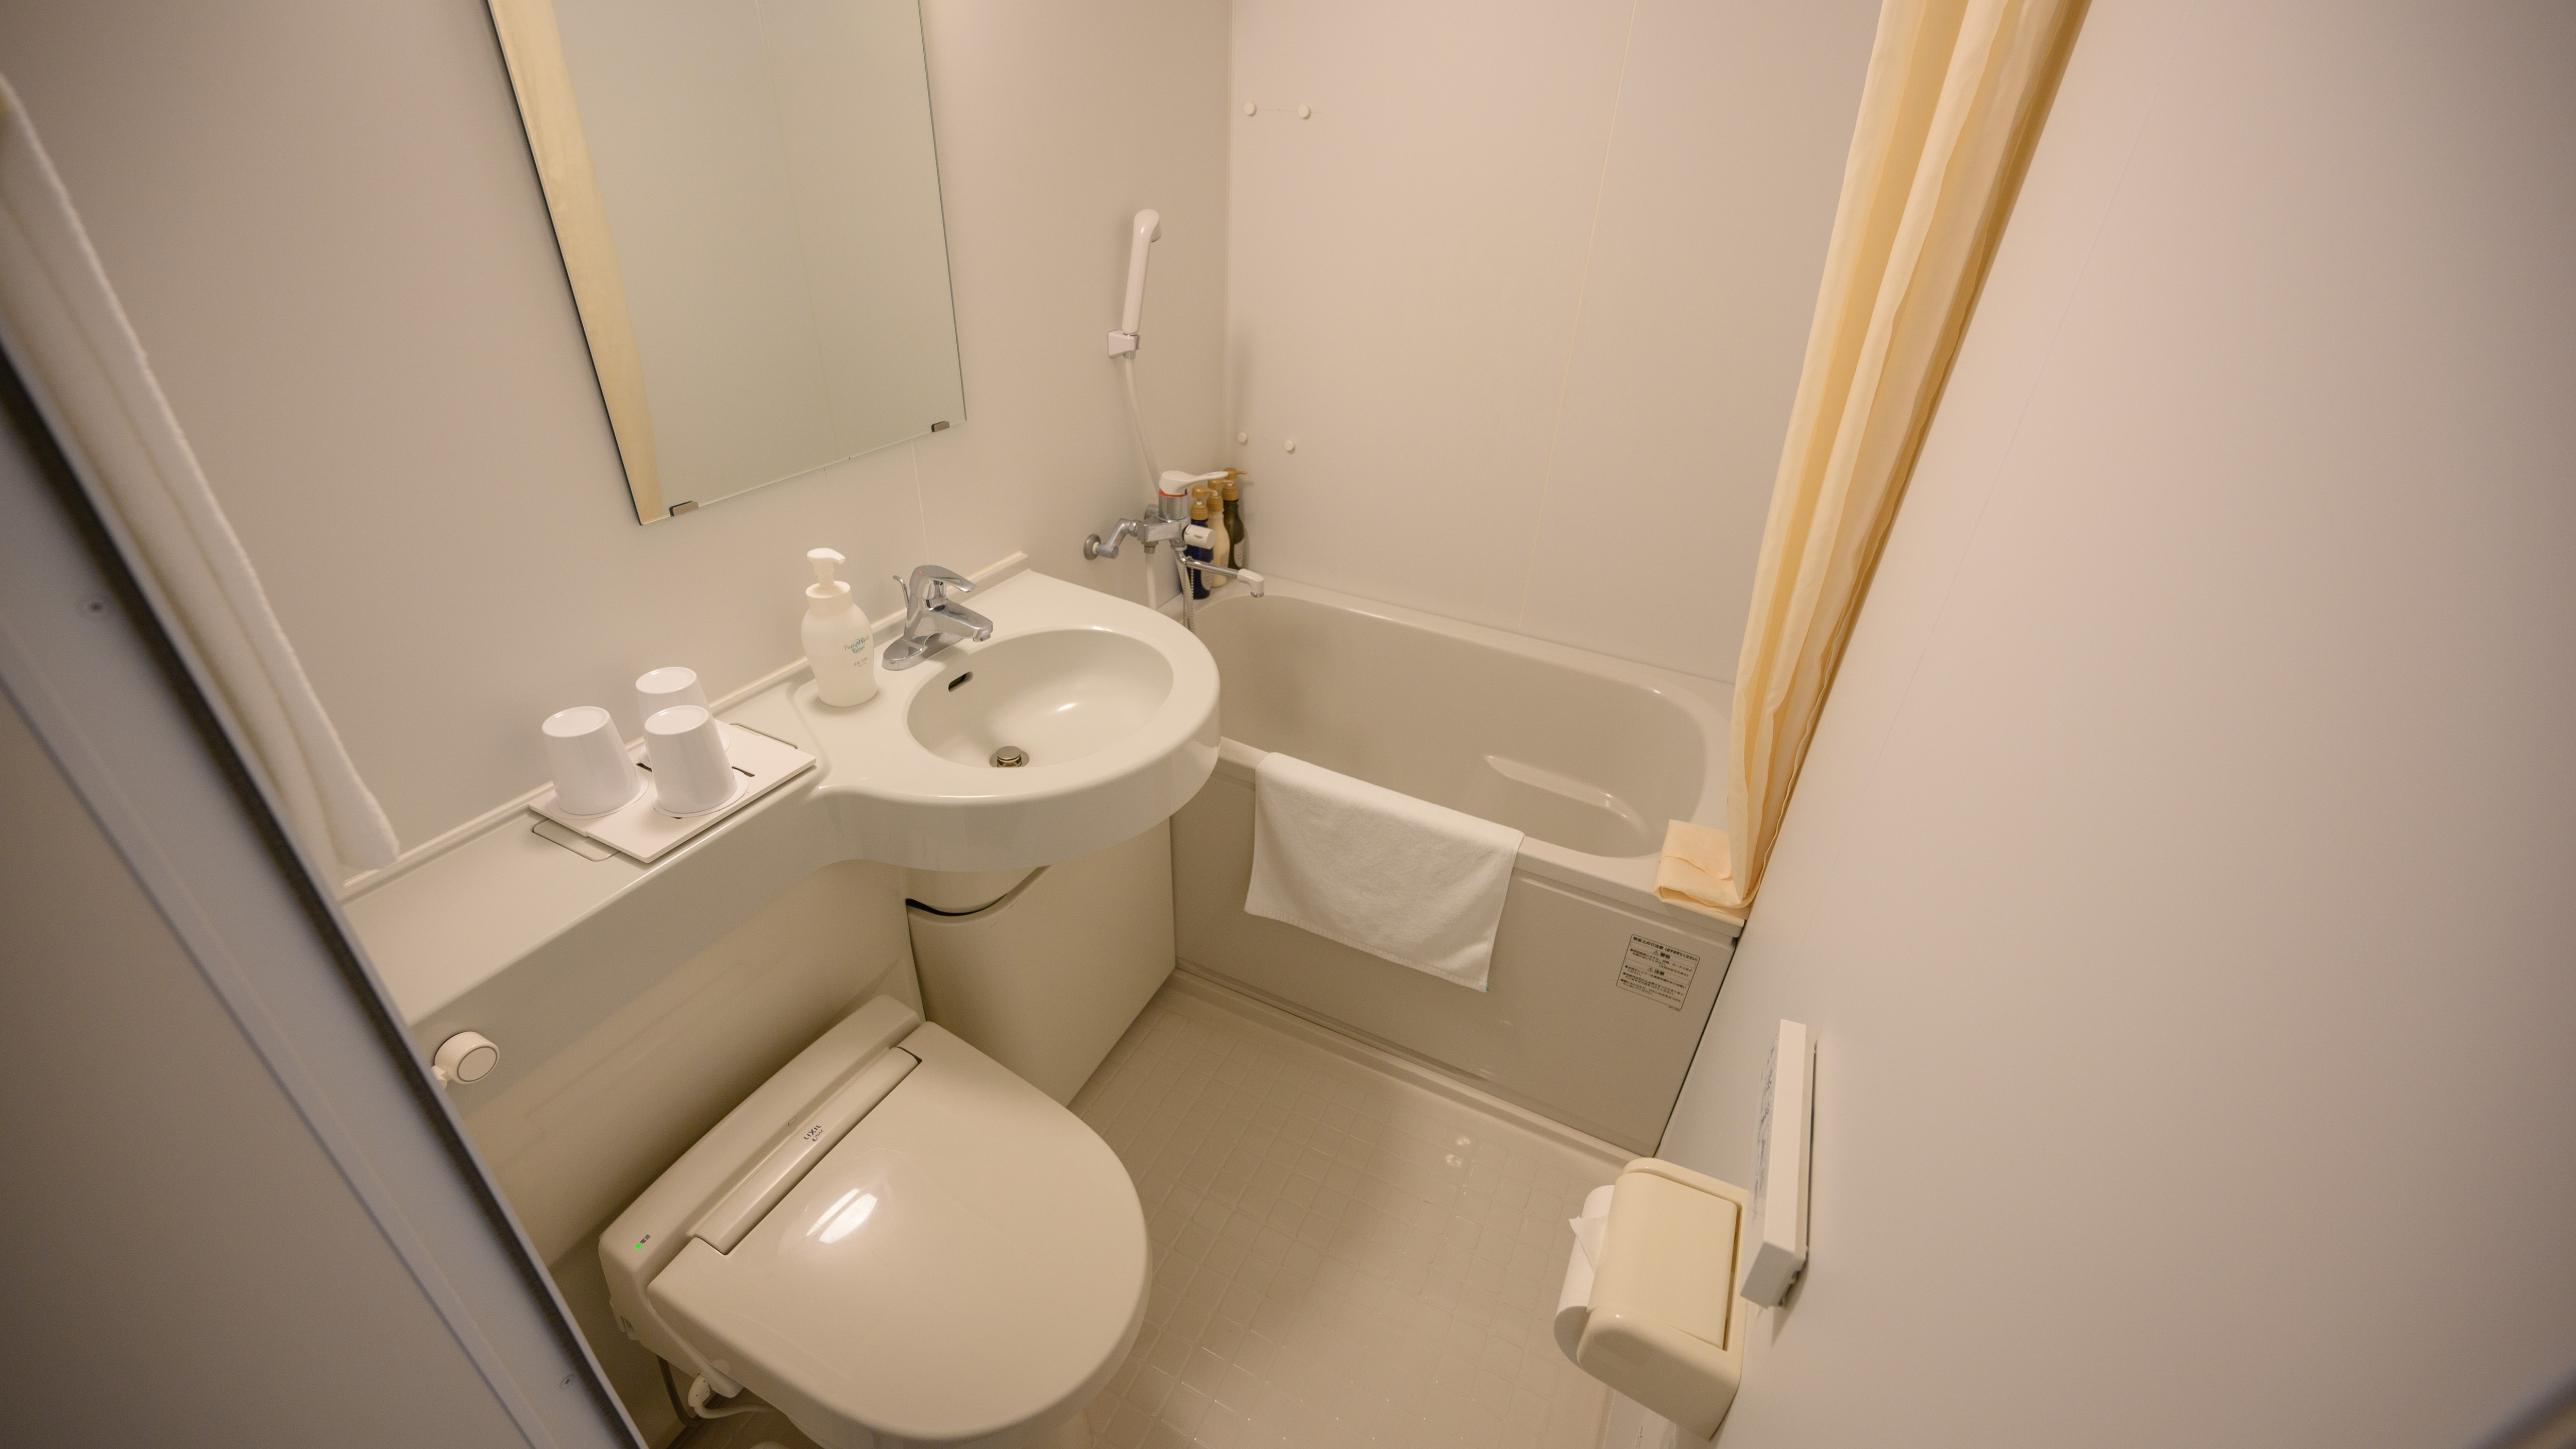 ◆Triple room / Only some rooms have unit baths renewed (example of guest room)